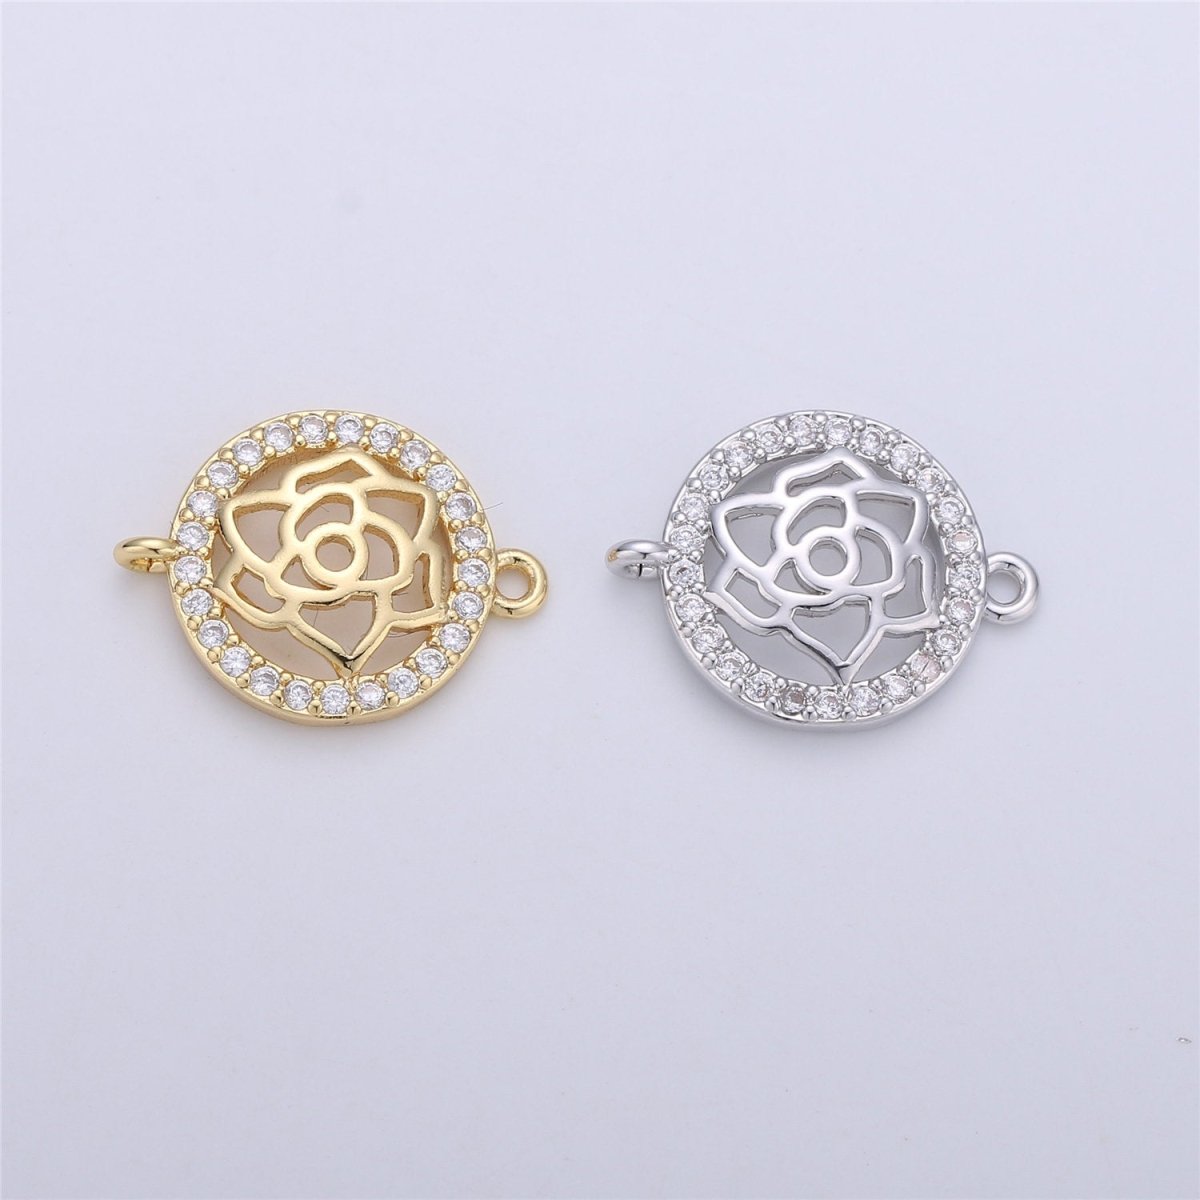 Micro Pave Dainty Rose Connectors Filigree Flower Charms in 14K Gold Filled for Bracelet Jewelry Supplies Component F-325 - DLUXCA